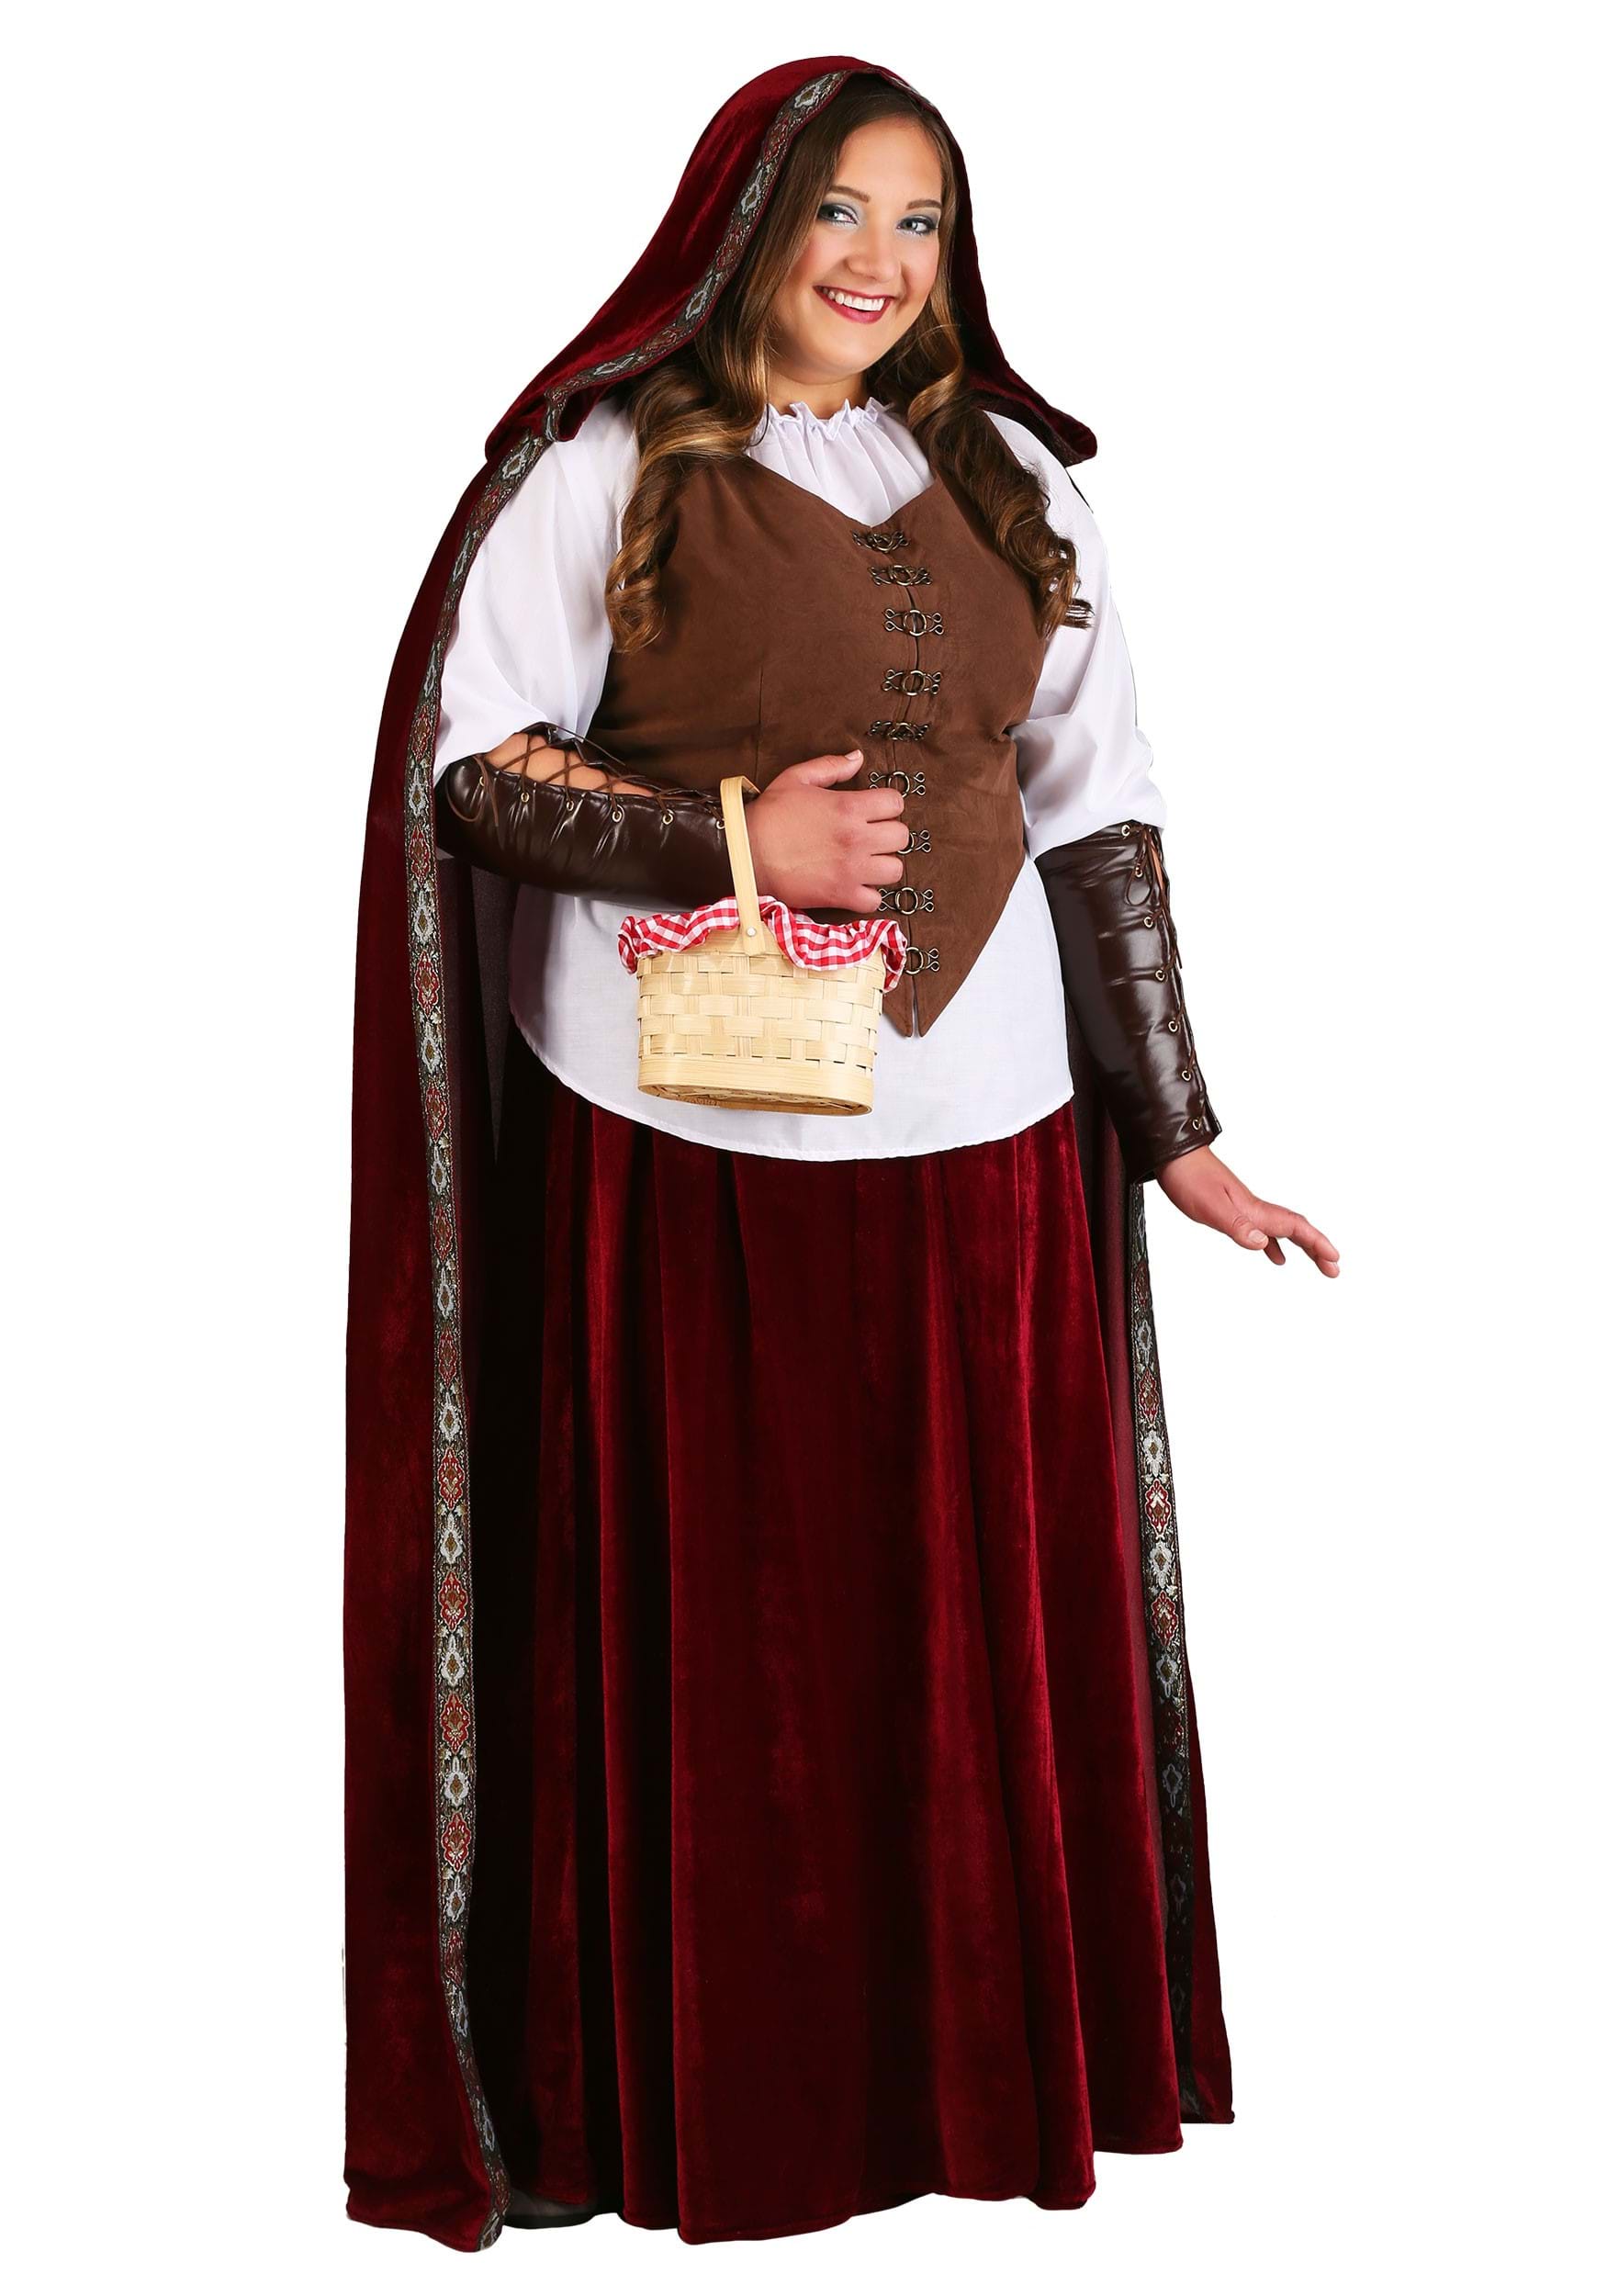 Red Riding Hood Plus Size Costume | Exclusive